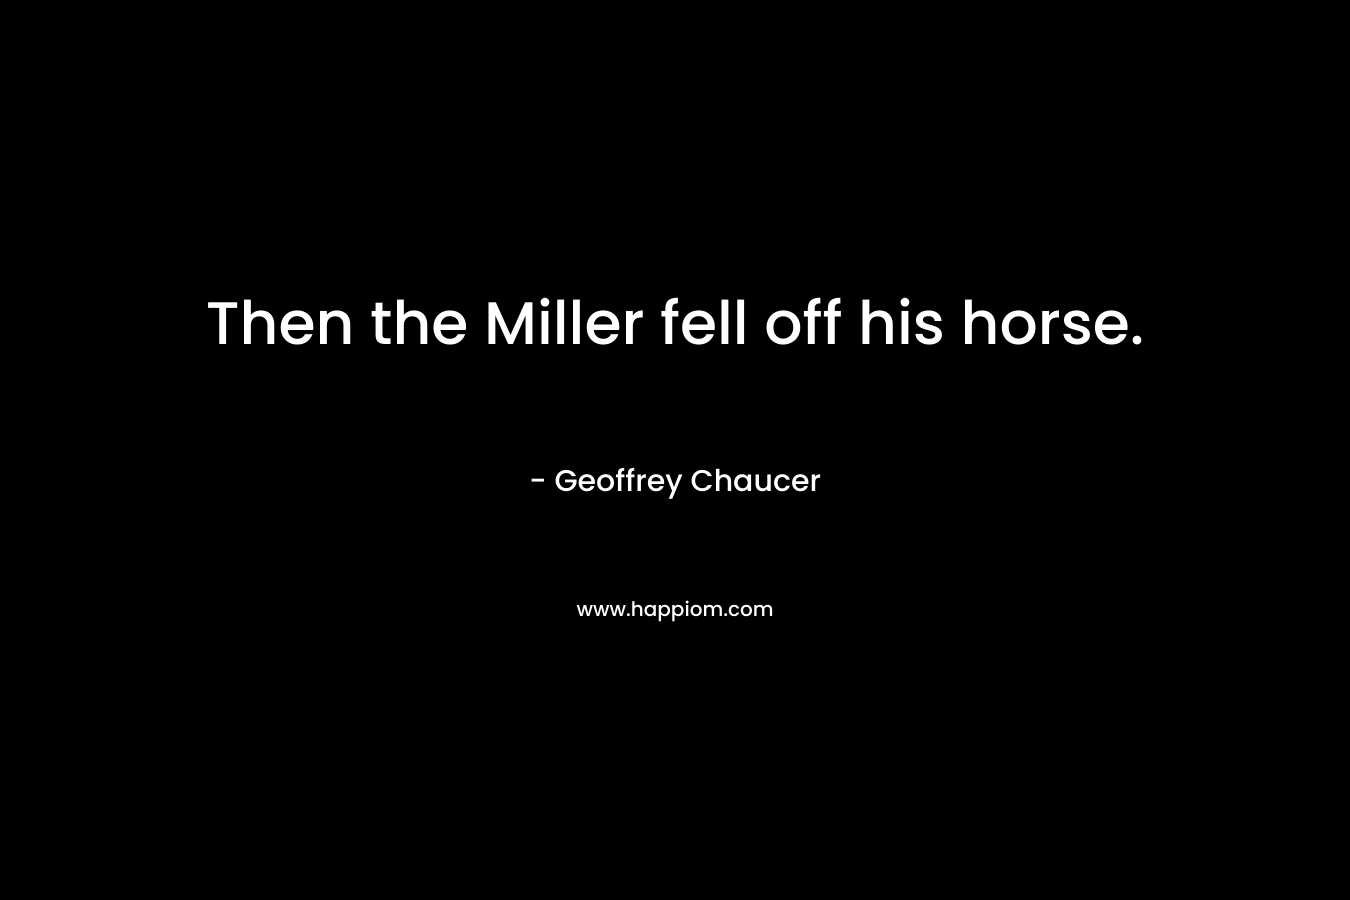 Then the Miller fell off his horse. – Geoffrey Chaucer